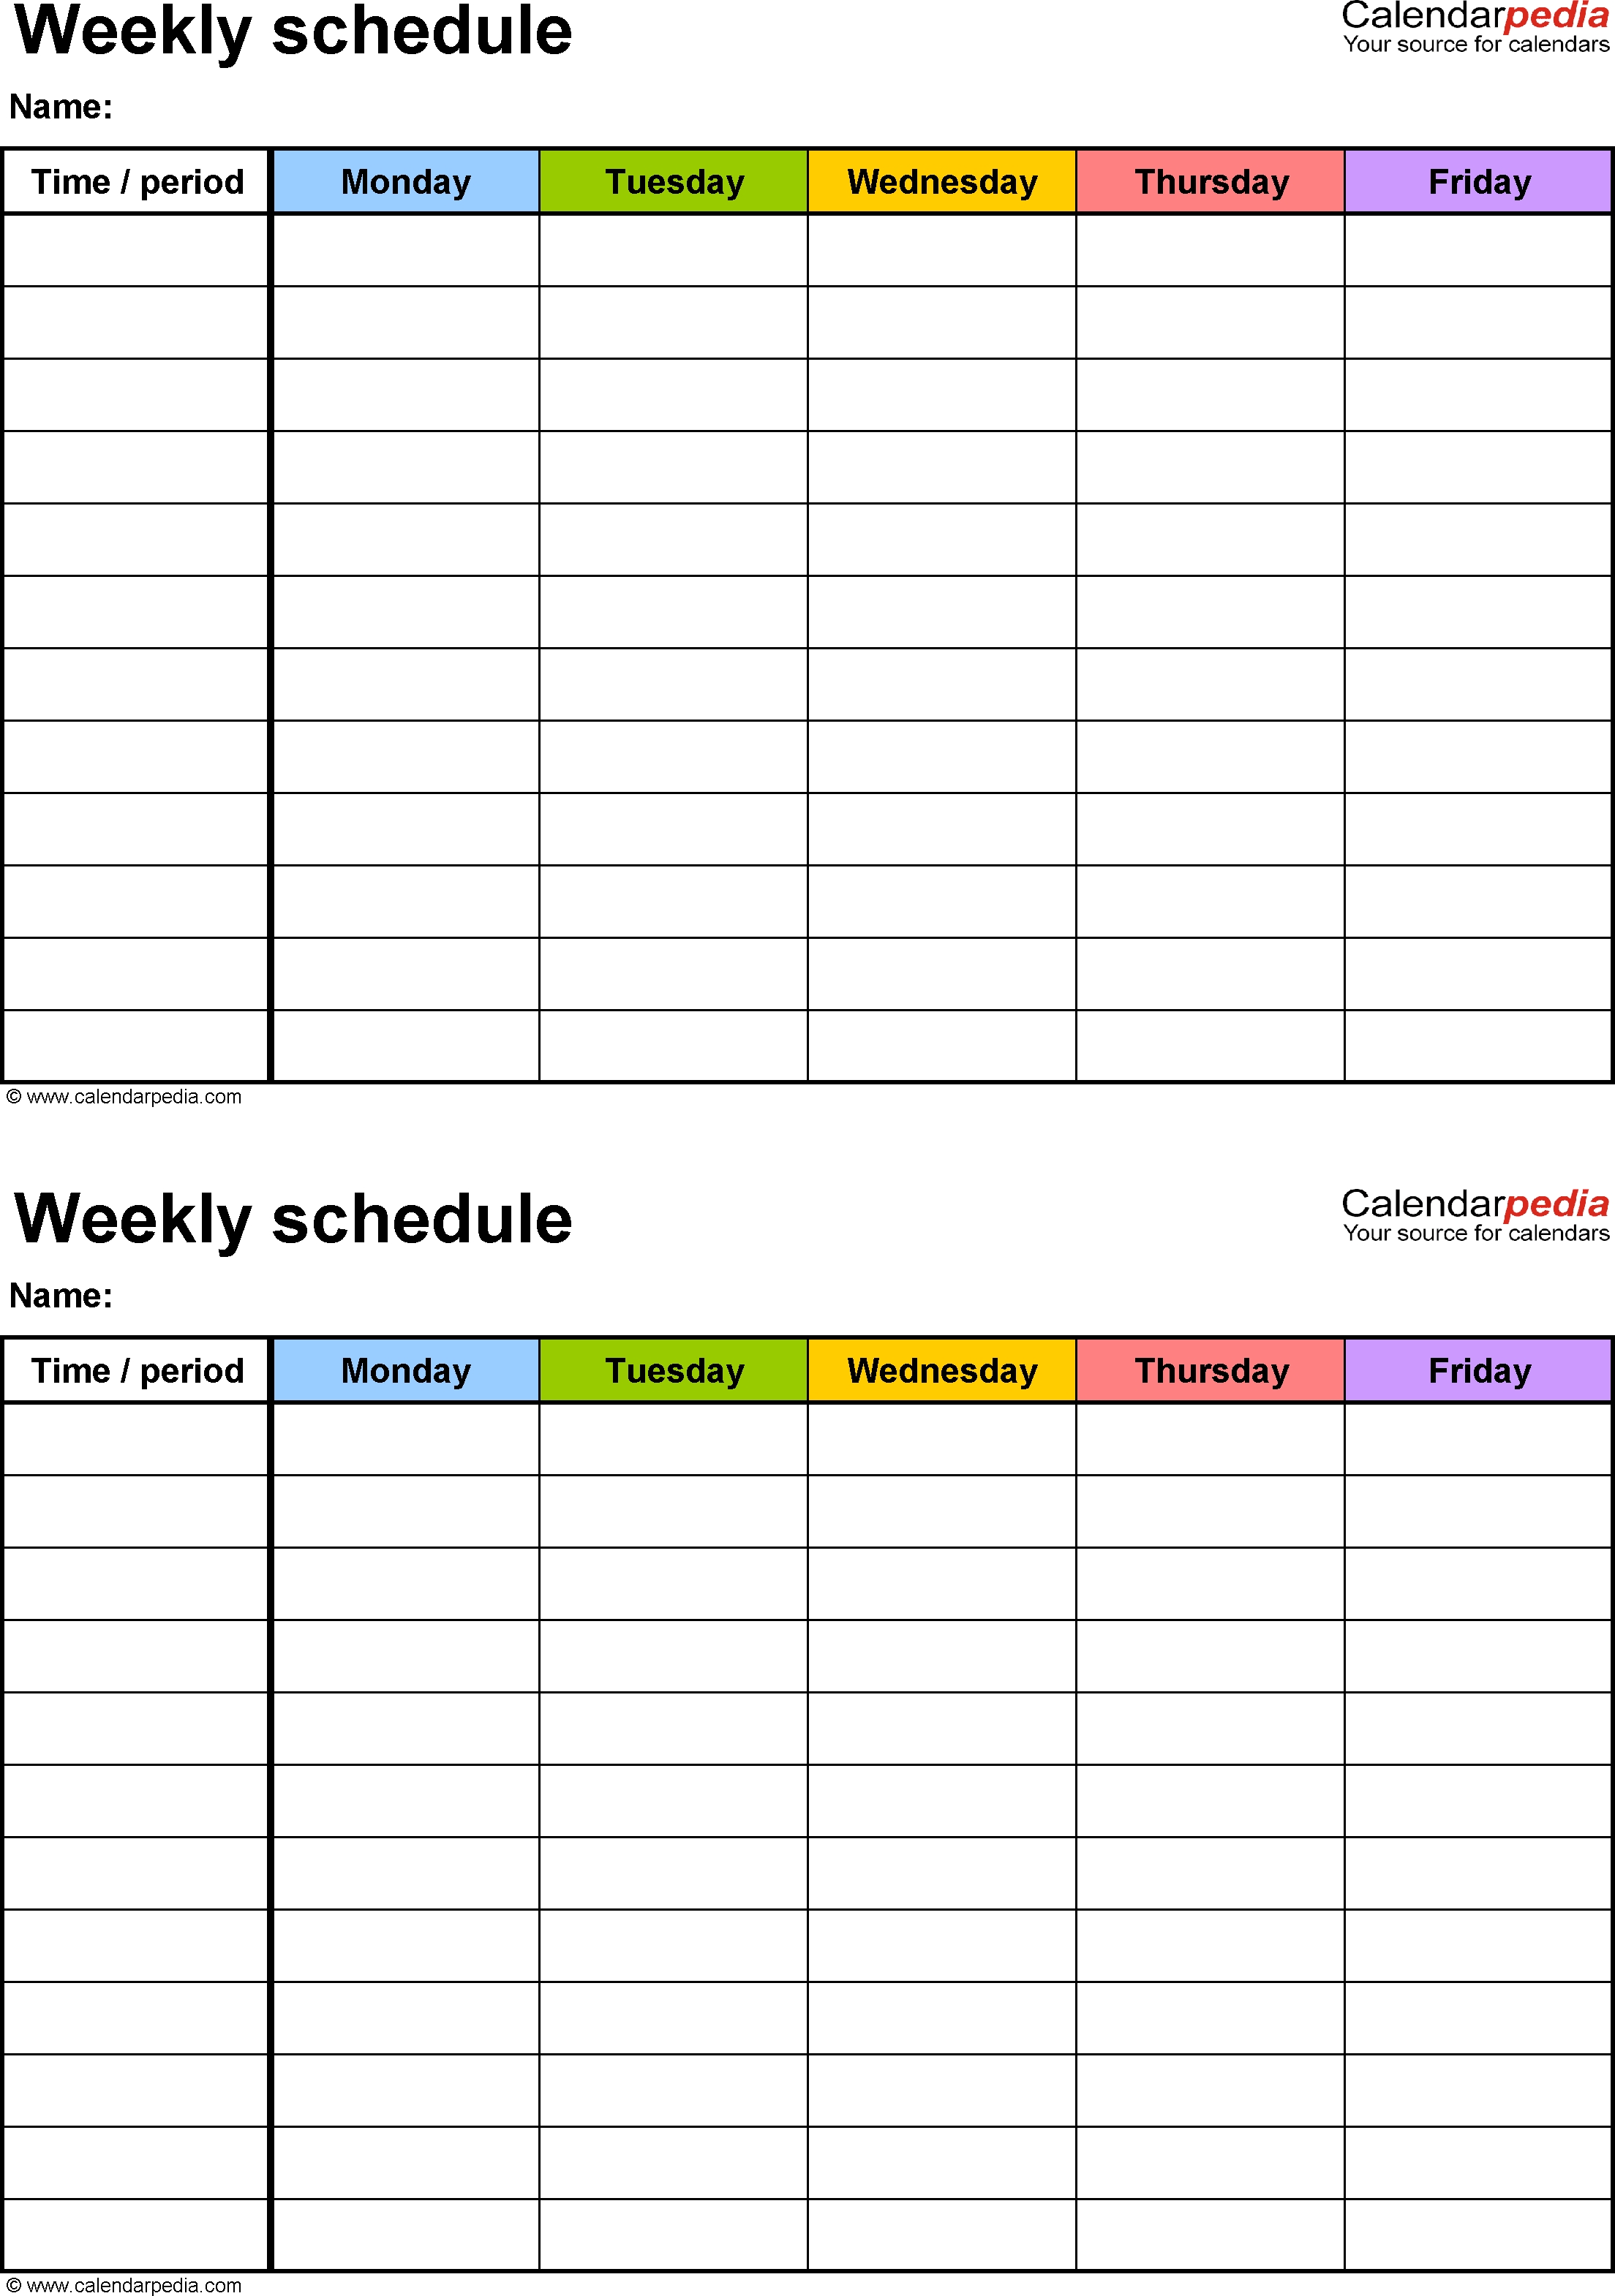 Free Weekly Schedule Templates For Word - 18 Templates-Monday Sunday Calendar Template